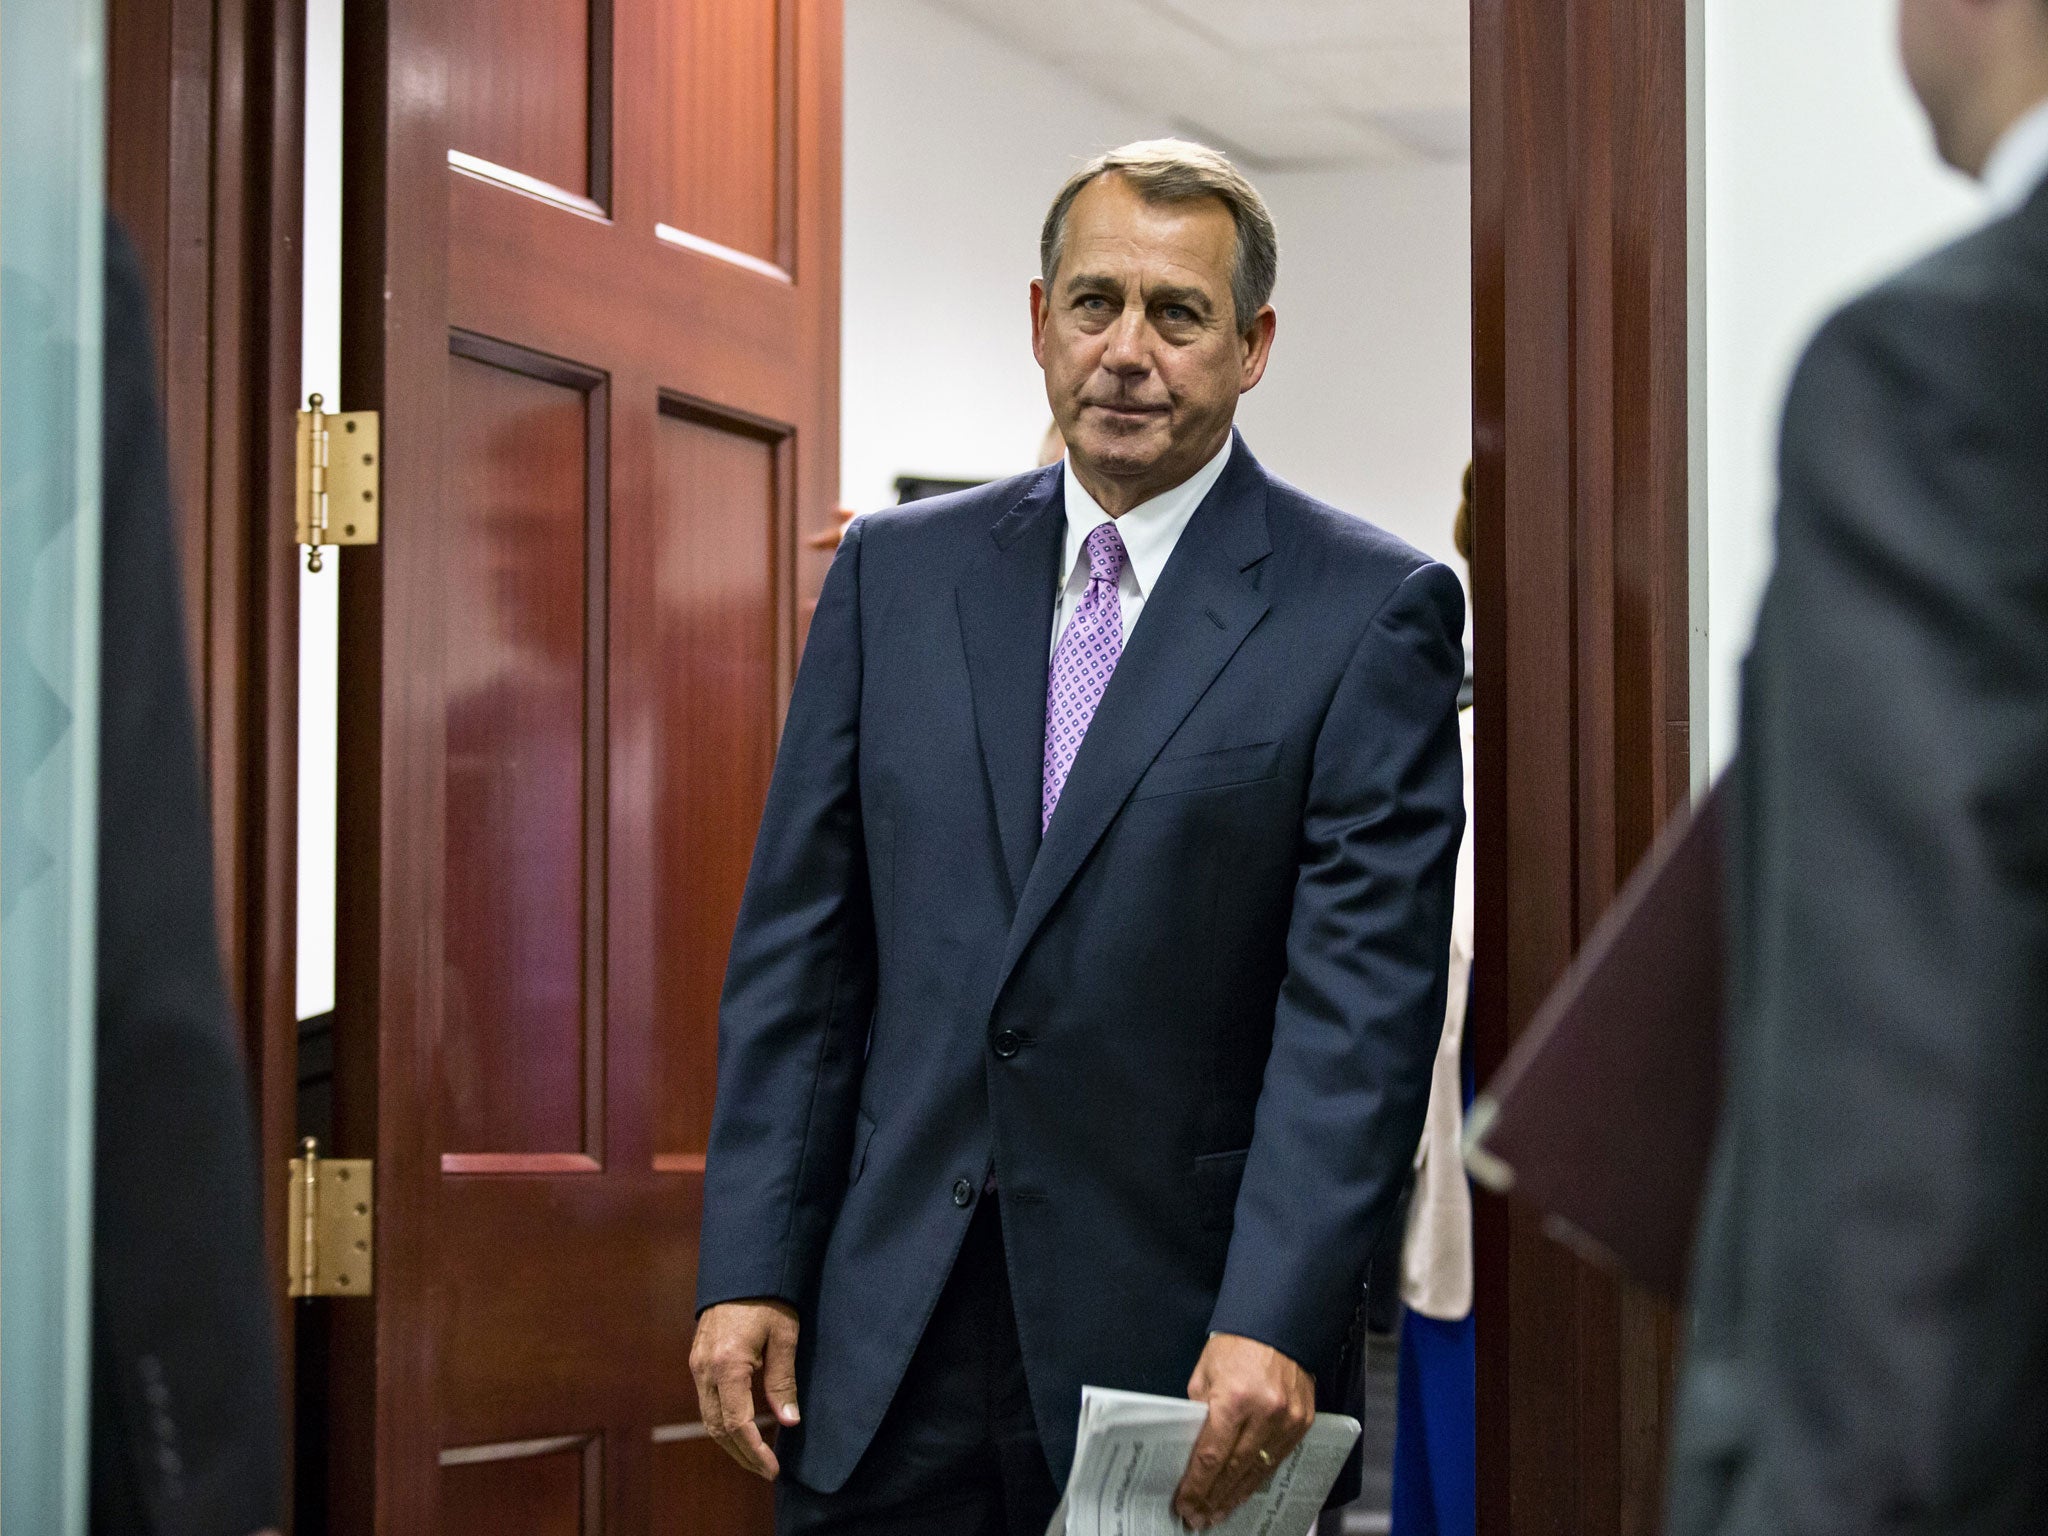 John Boehner asked Republicans to follow him in allowing a short-term increase in the debt ceiling